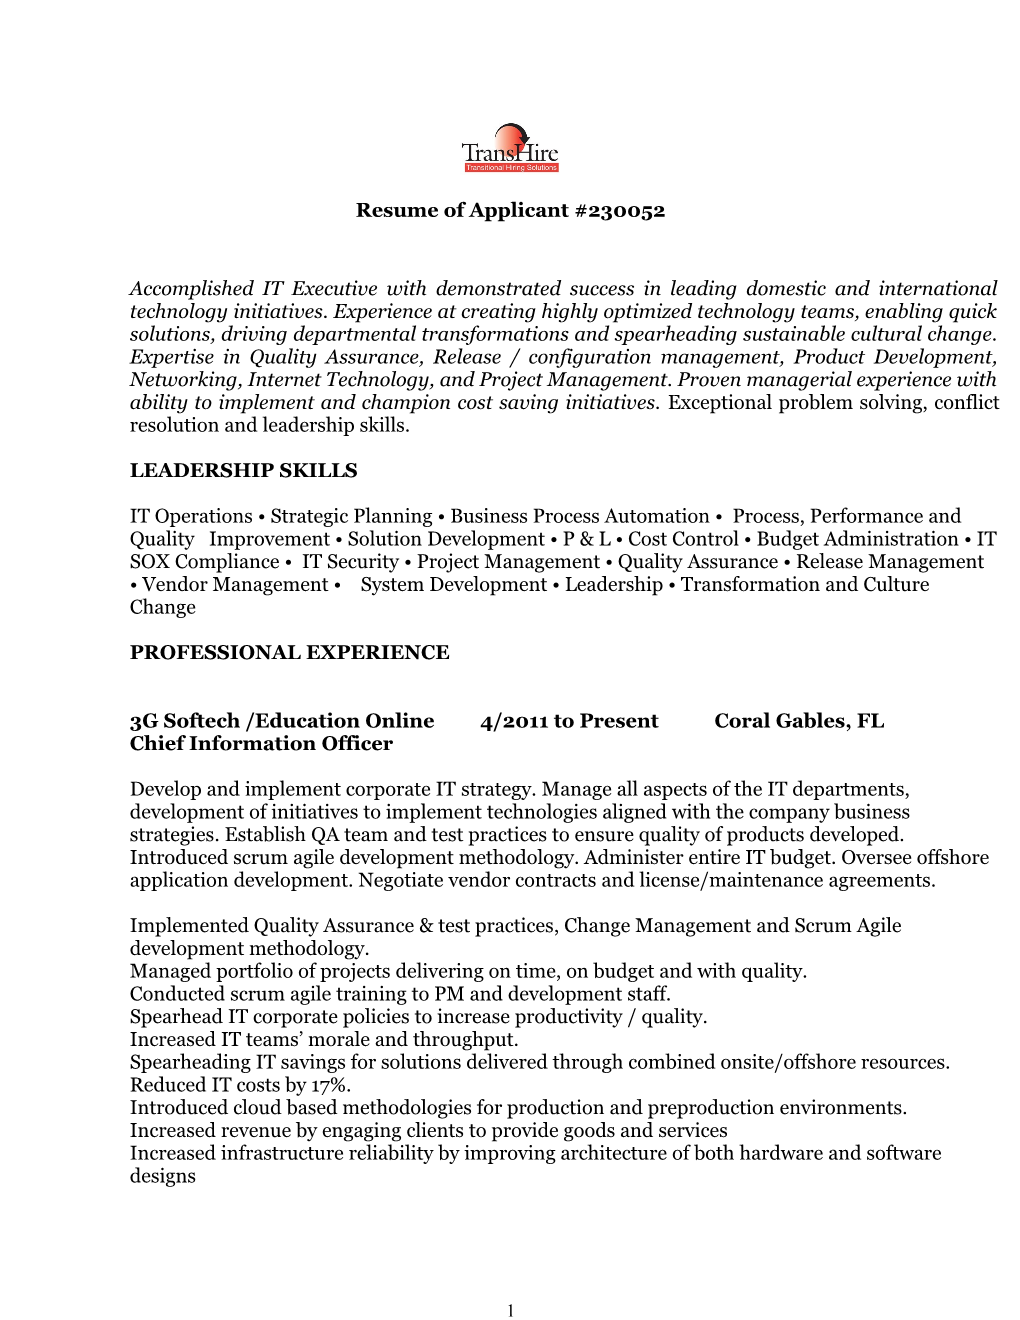 Resume of Applicant #230052